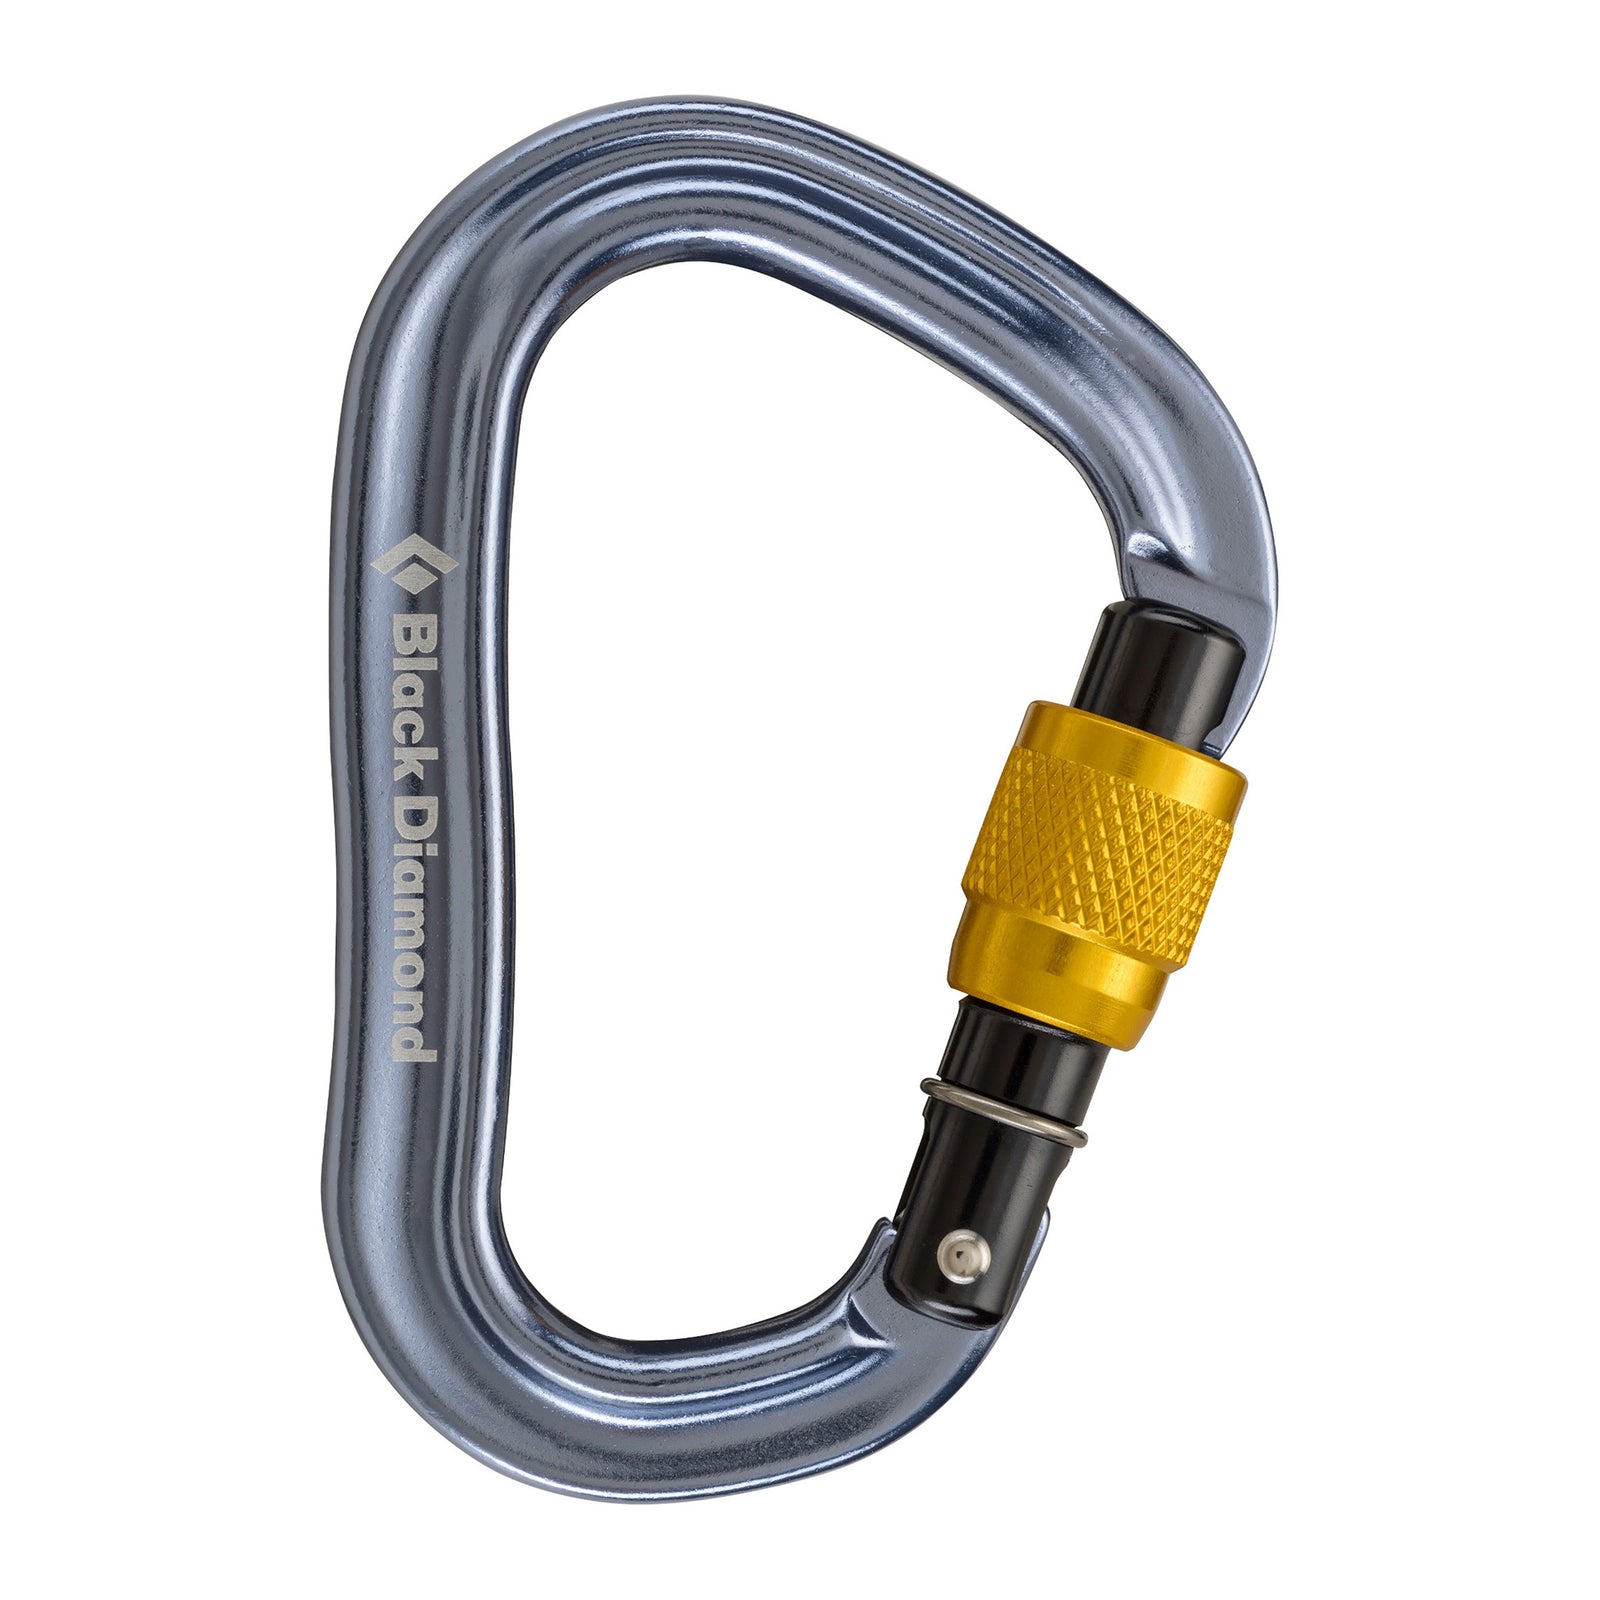 locking carabiner with a yellow screwgate